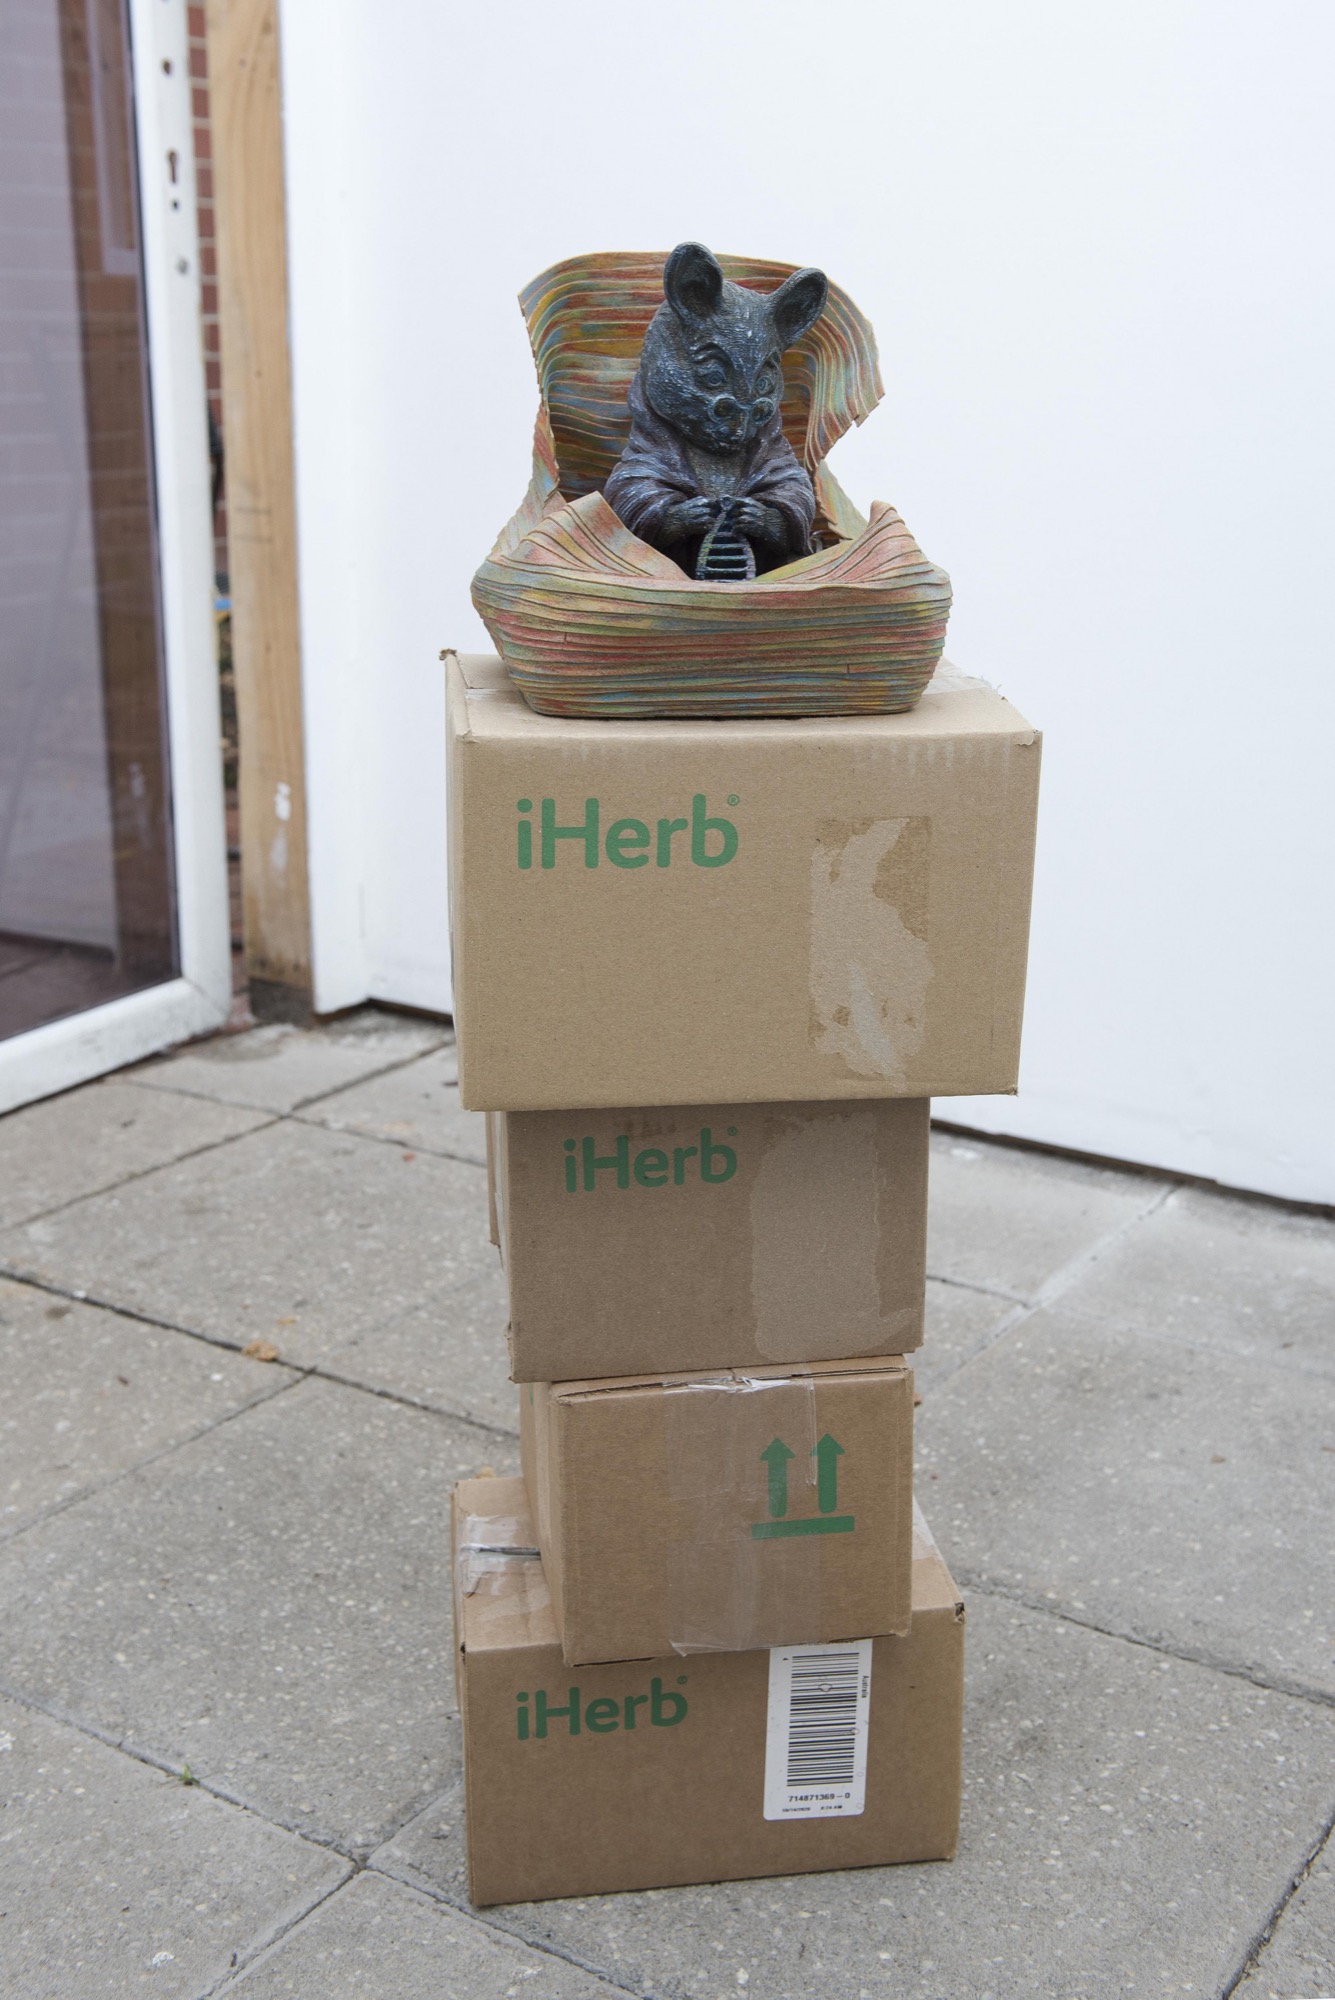 Chris Madden, <em>Monument to the Monument of the Laboratory Mouse</em>, 2021, Worbla thermoplastic, cardboard boxes, shredded paper, plastic, Fact Republic, Savage Garden. Photo: Jordan Halsall.